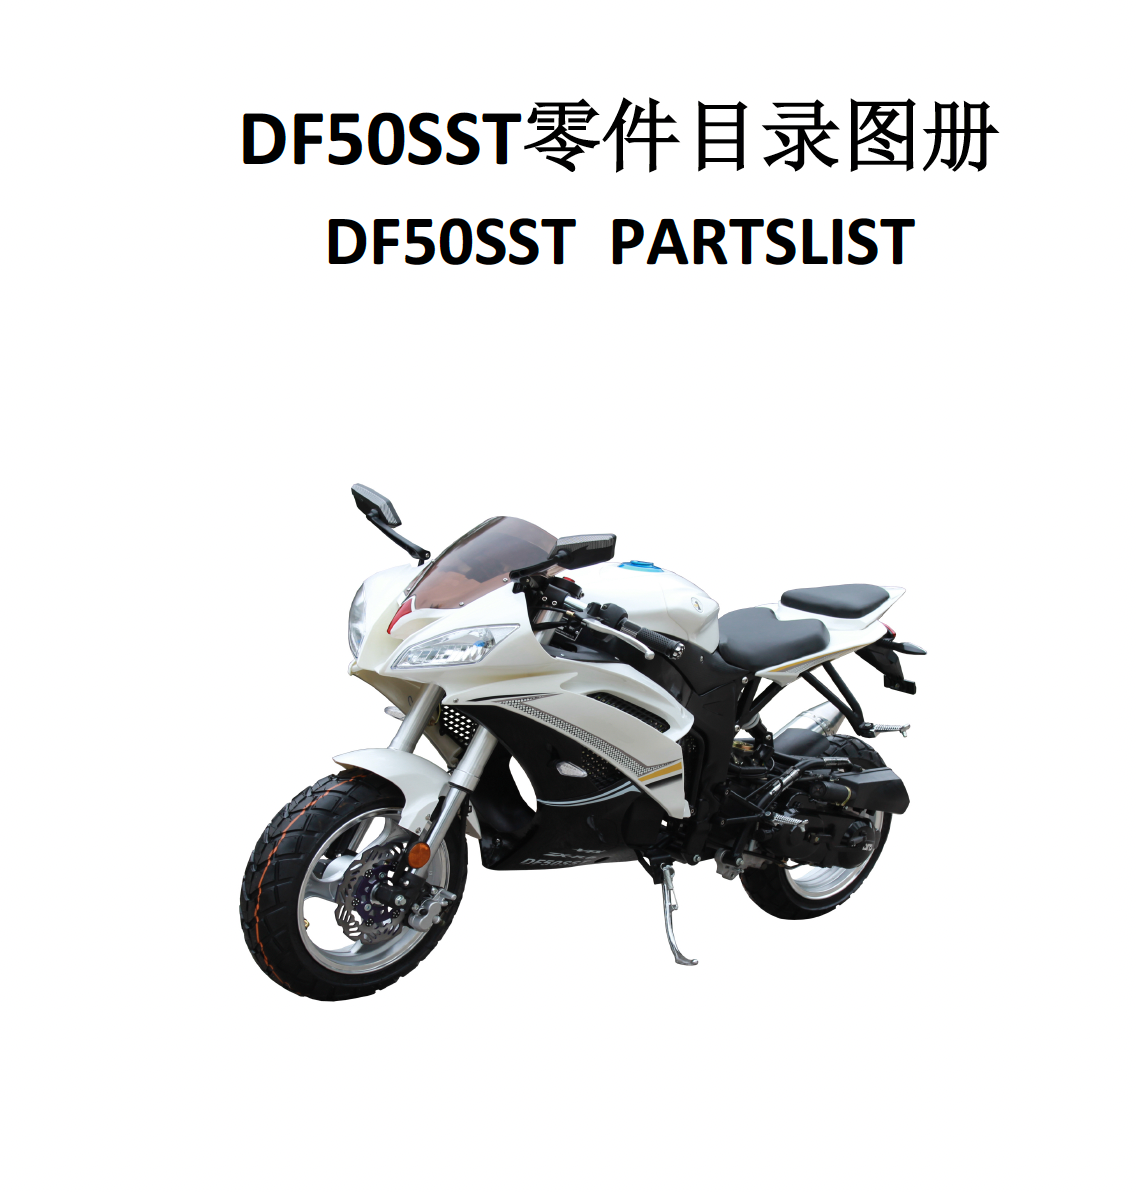 Parts manual for DF50SST. Owners manual for Venom X18 50cc Scooter. DF50SST parts manual